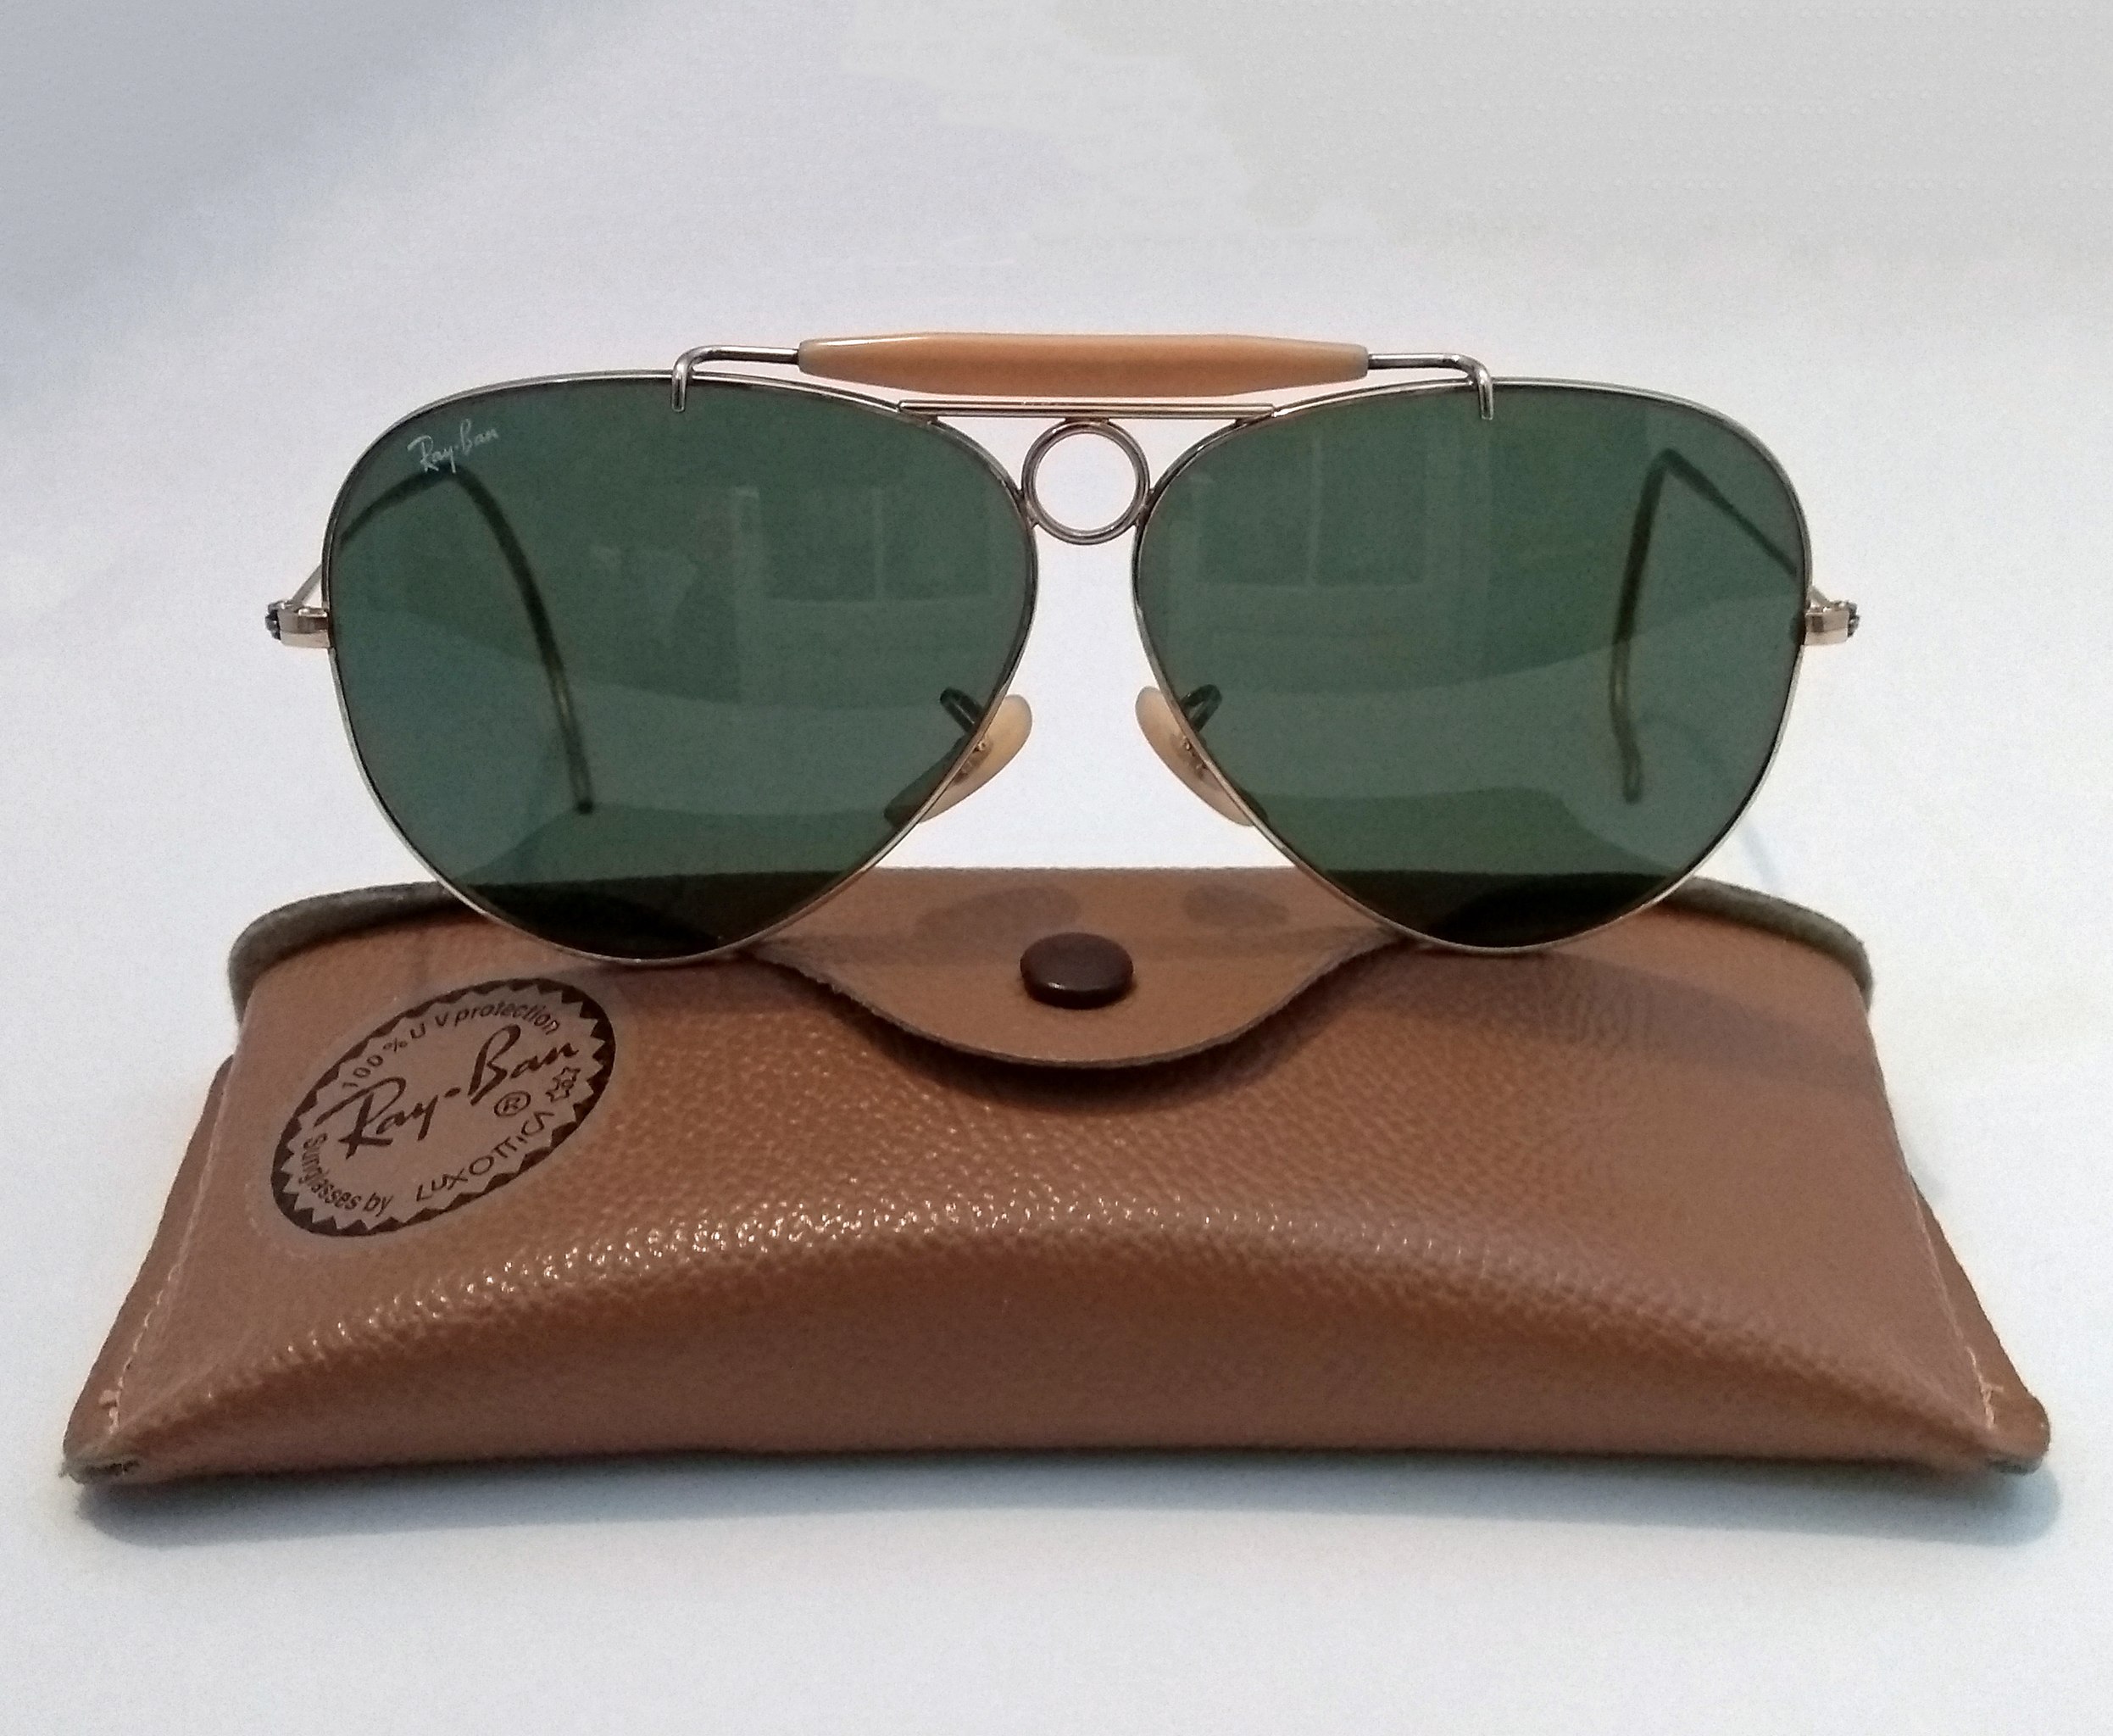 File:Ray-Ban Aviator Shooter RB3139-001 3N (G-15 lenses) Size 62